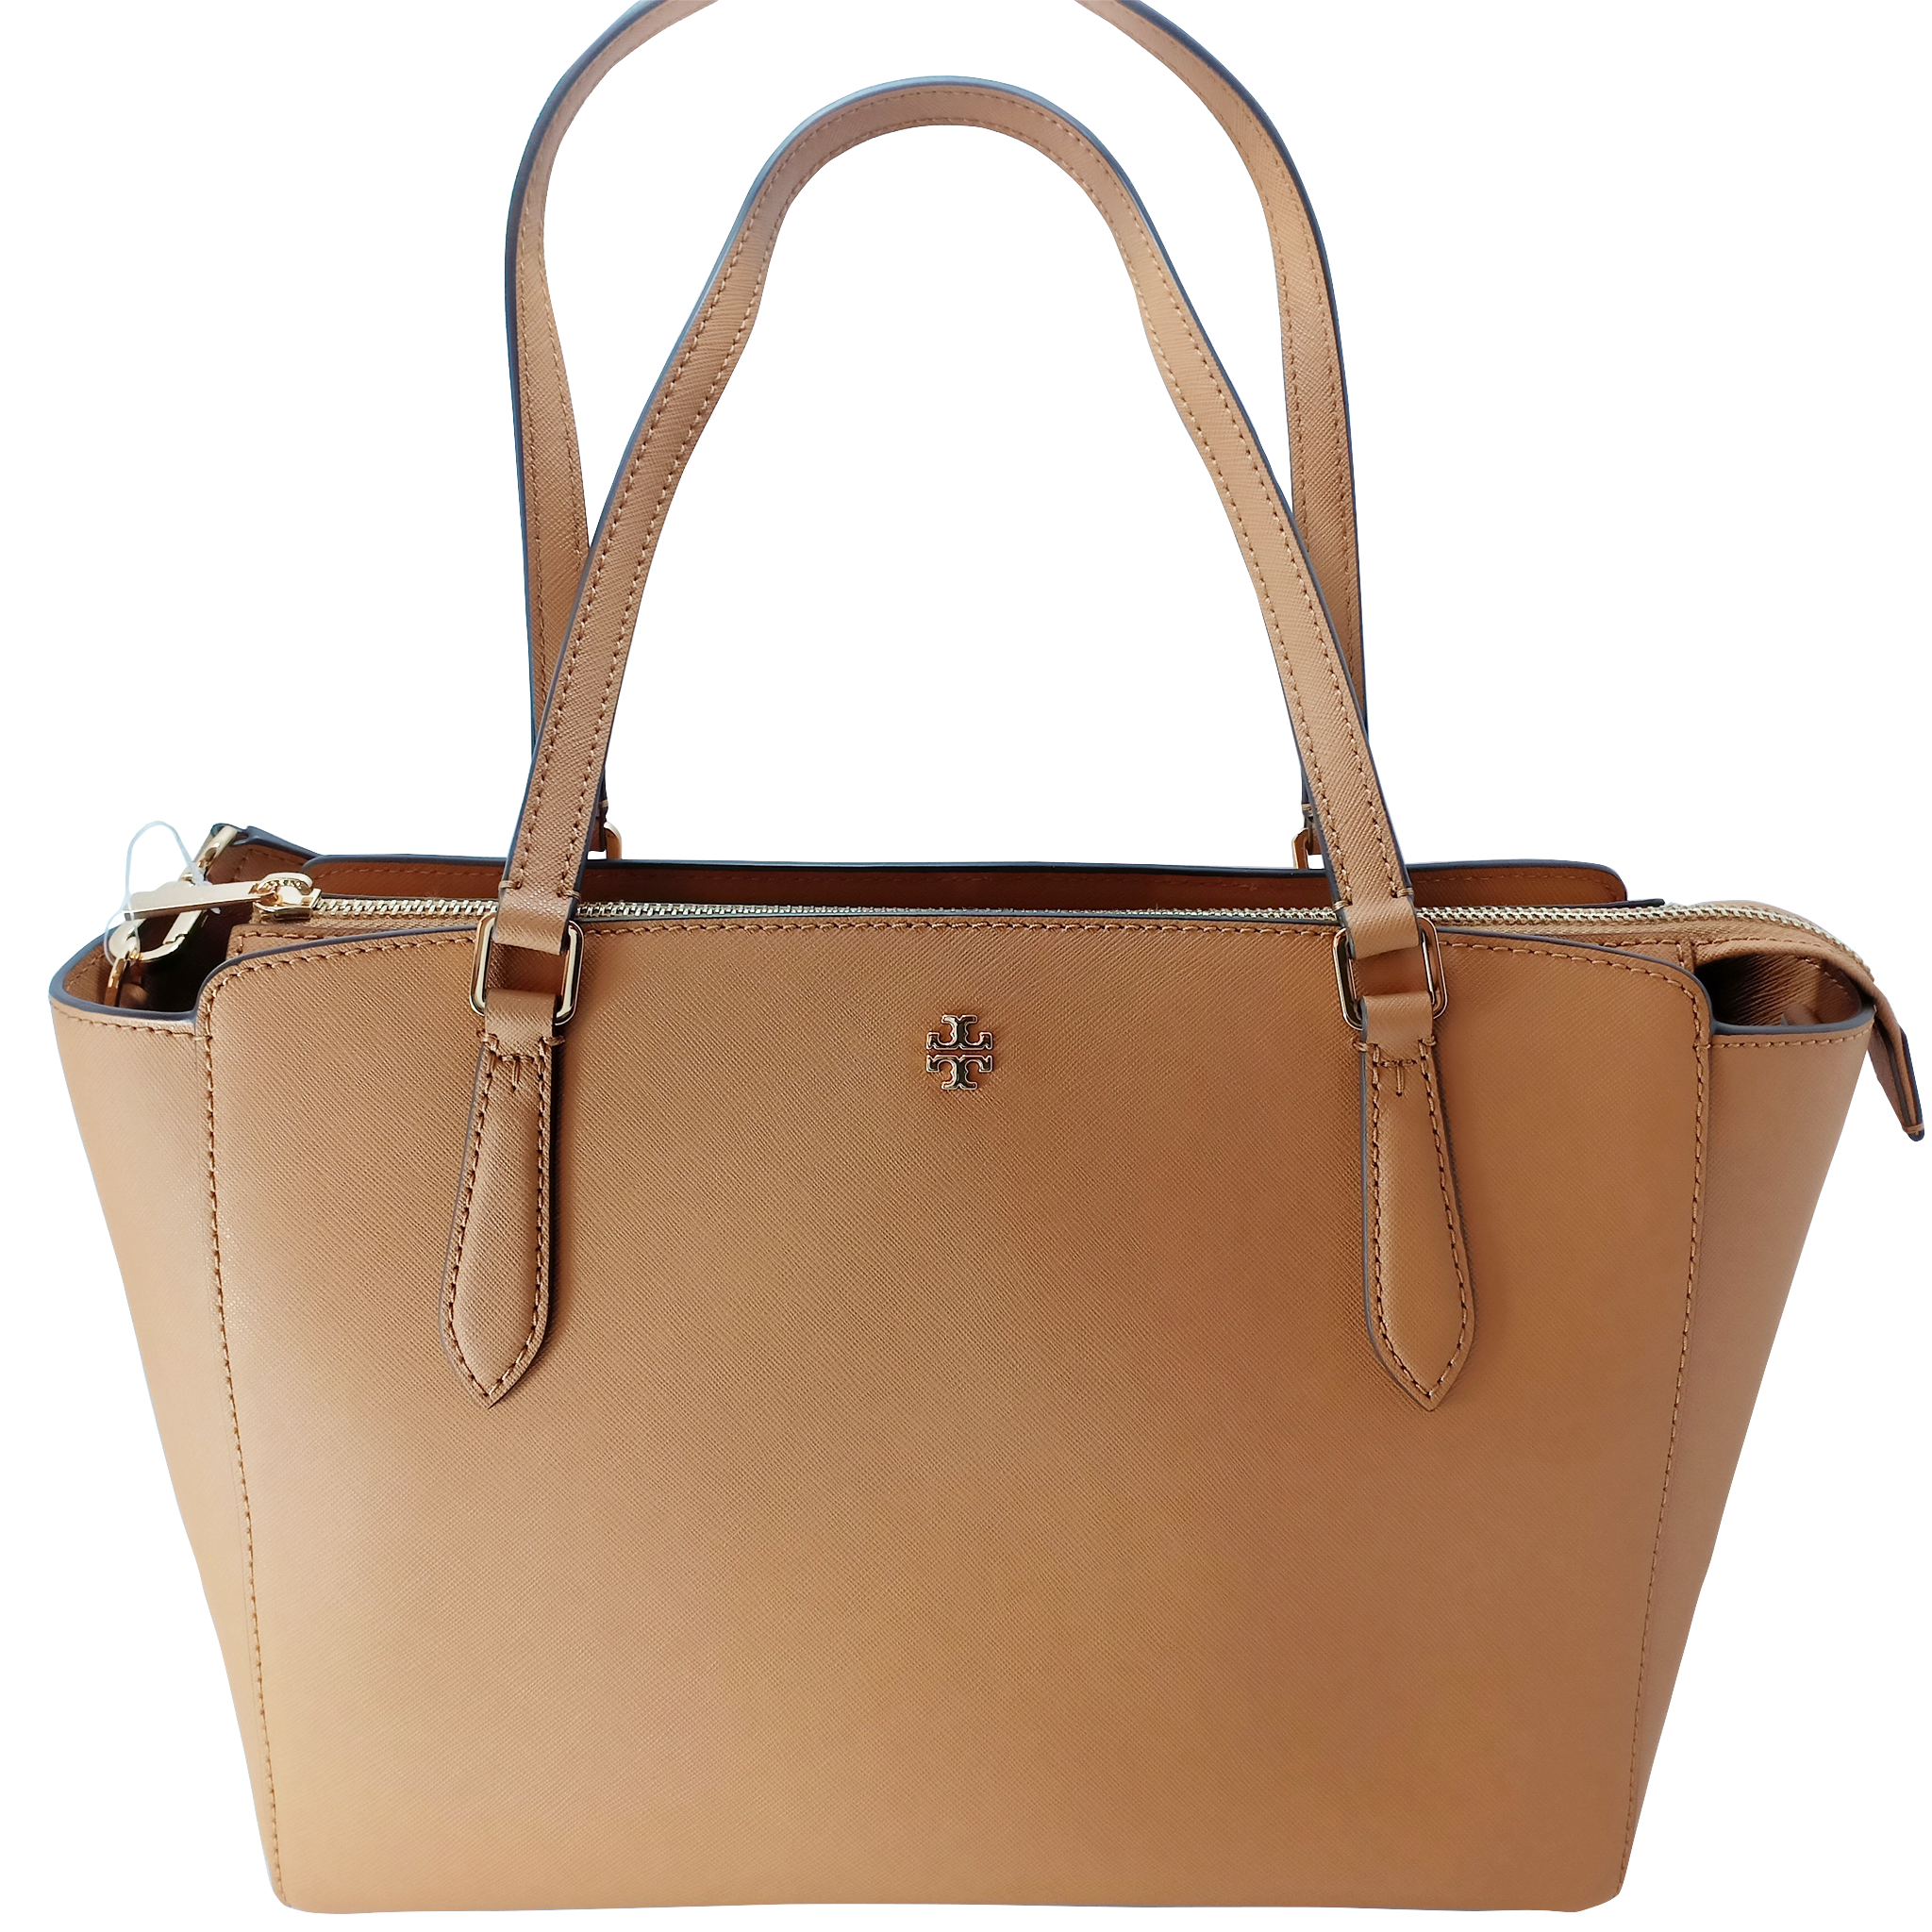 tory burch emerson large buckle tote